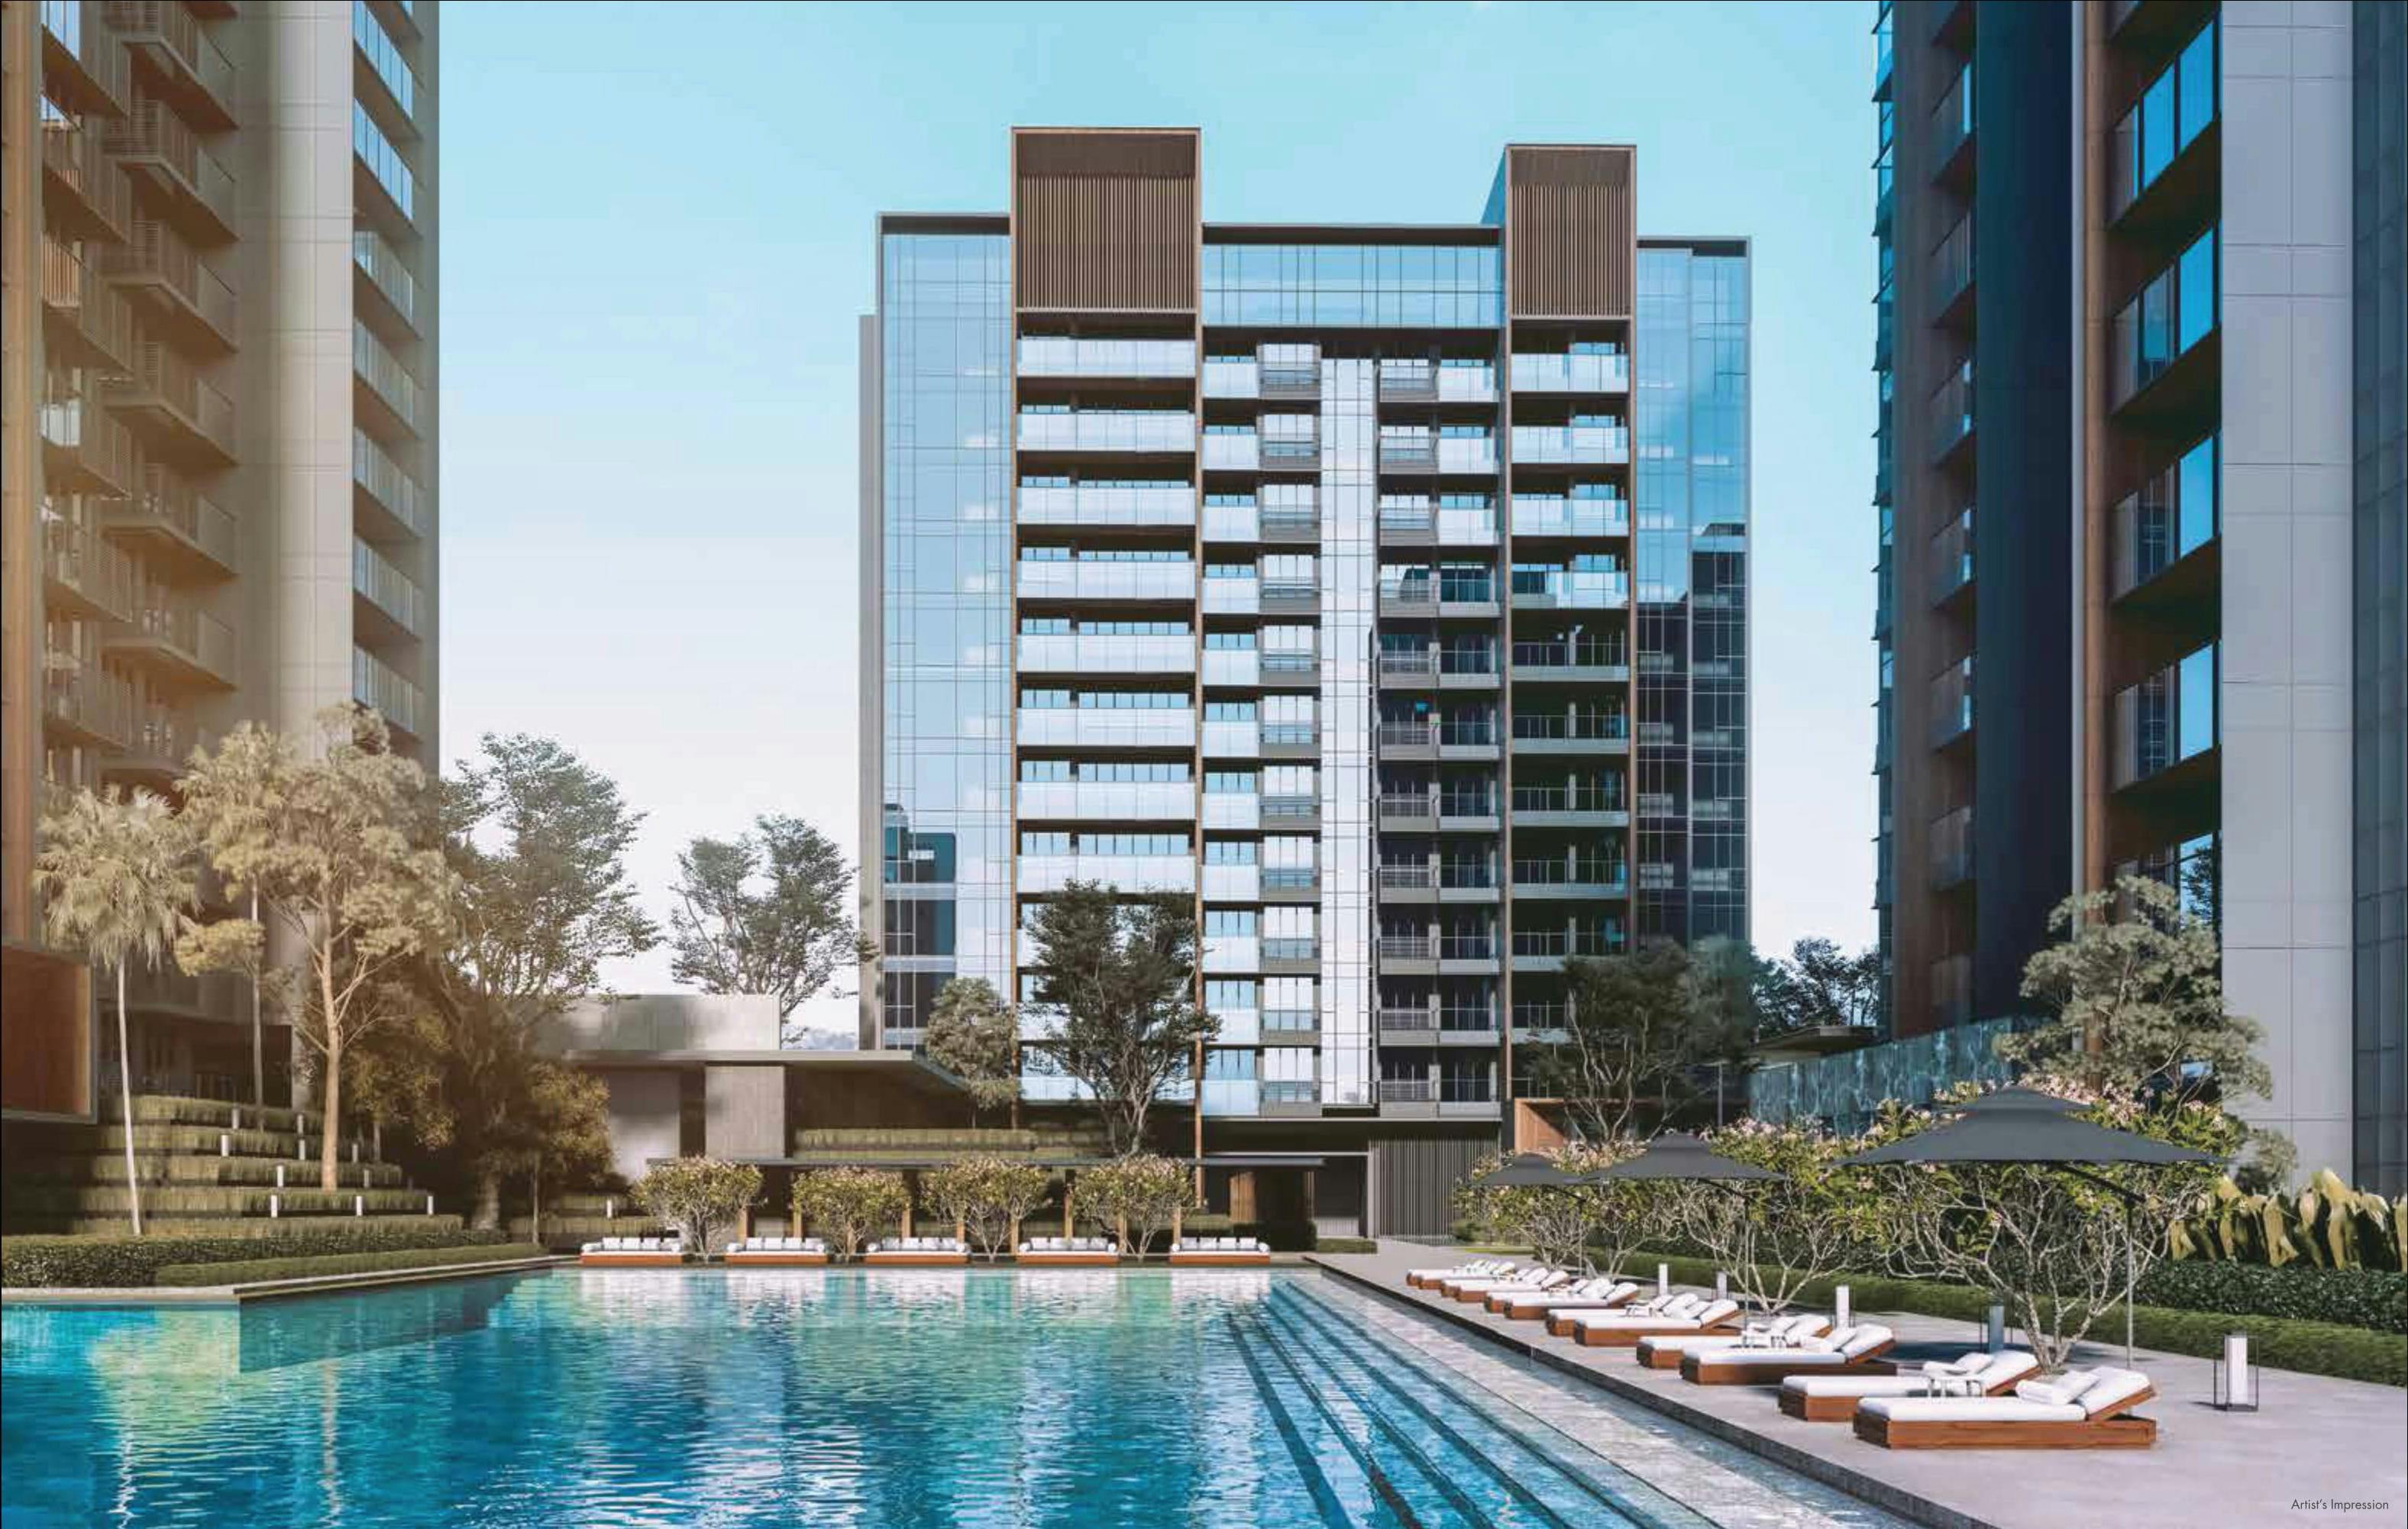 Pool view of the stunning Leedon Green, located in Holland